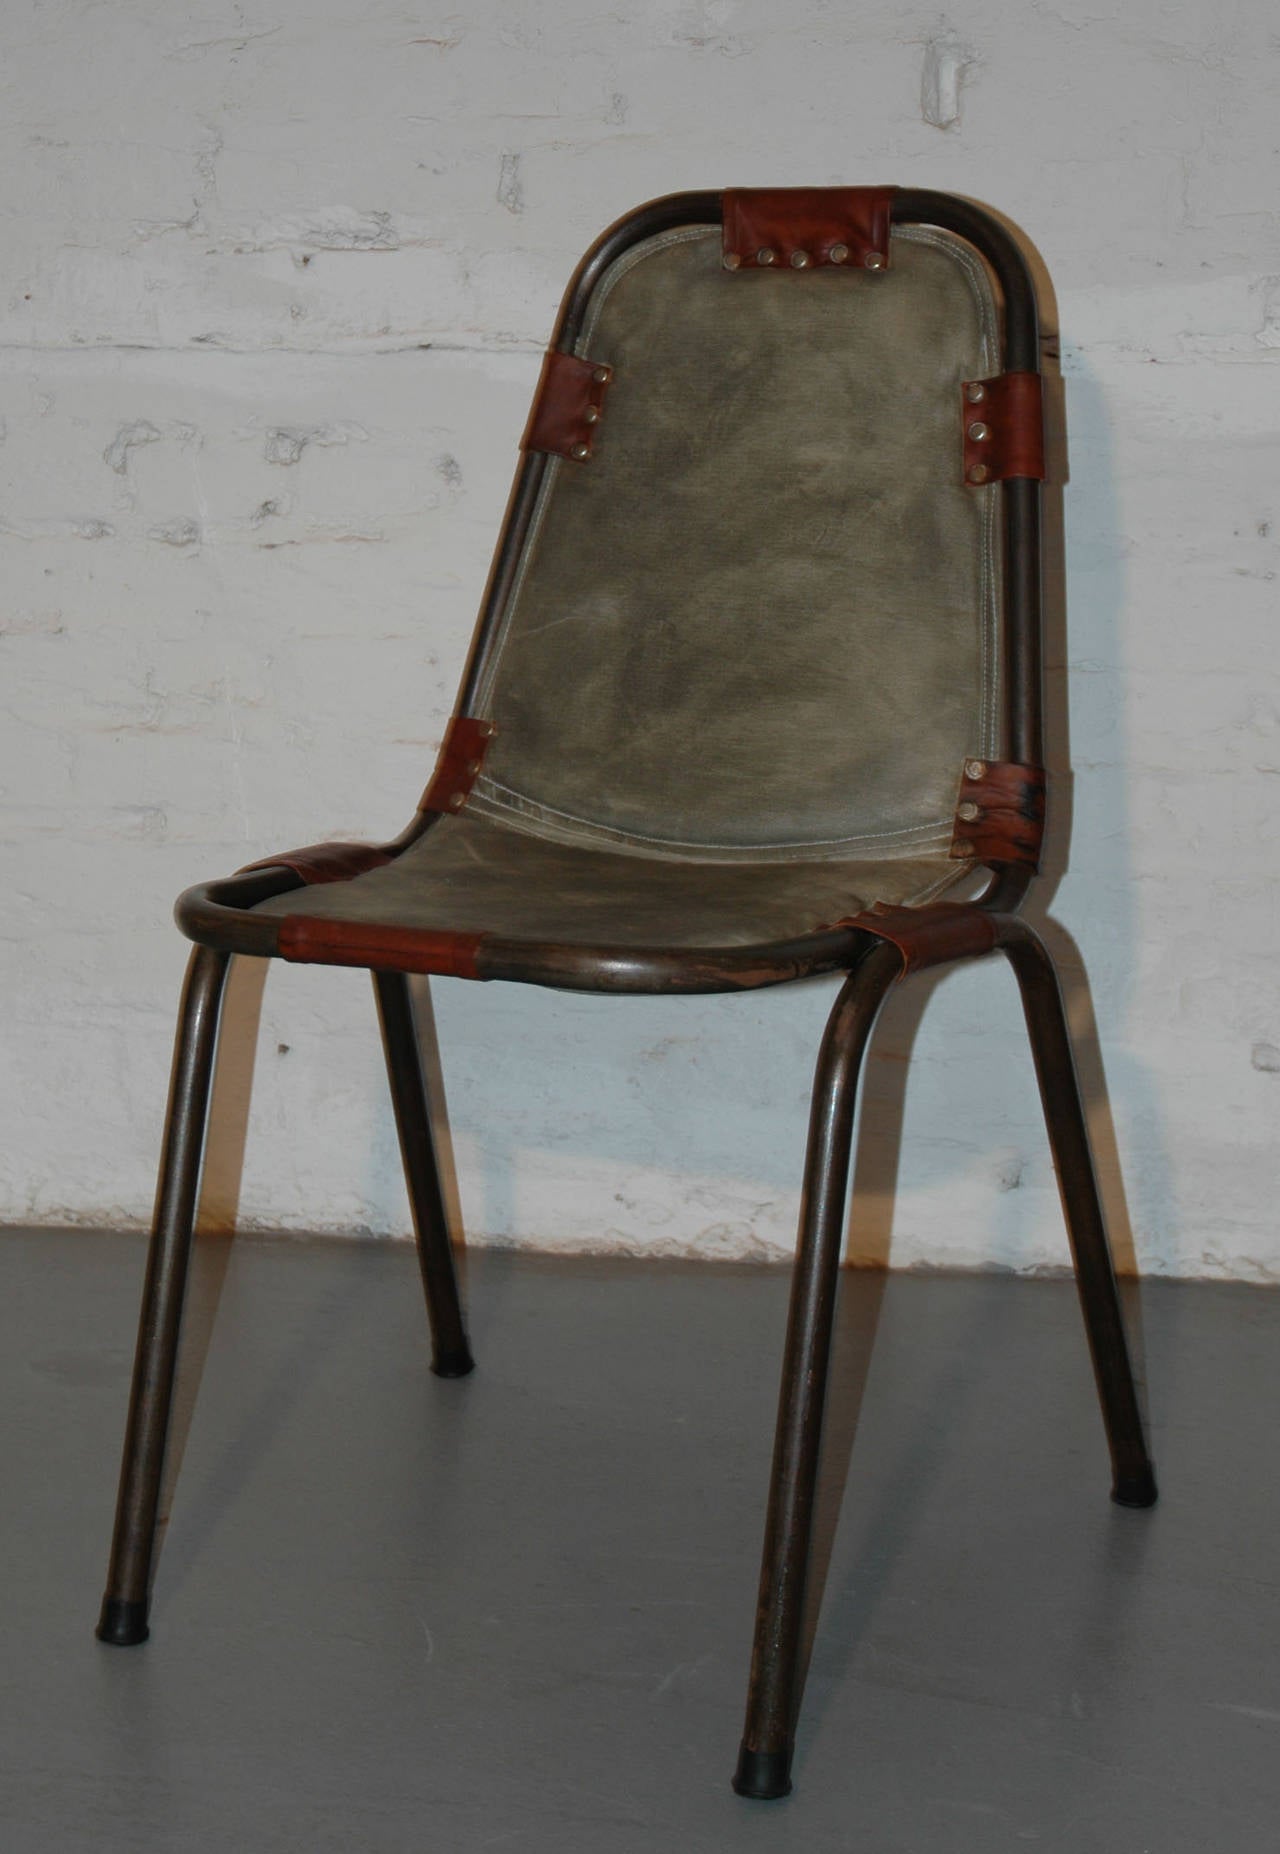 This chair was designed by Charlotte Perriand in the 1960s for the ski center Les Arcs in the French Alps. The shown sample is a different model with canvas (normally in leather) and with a larger steel tube.